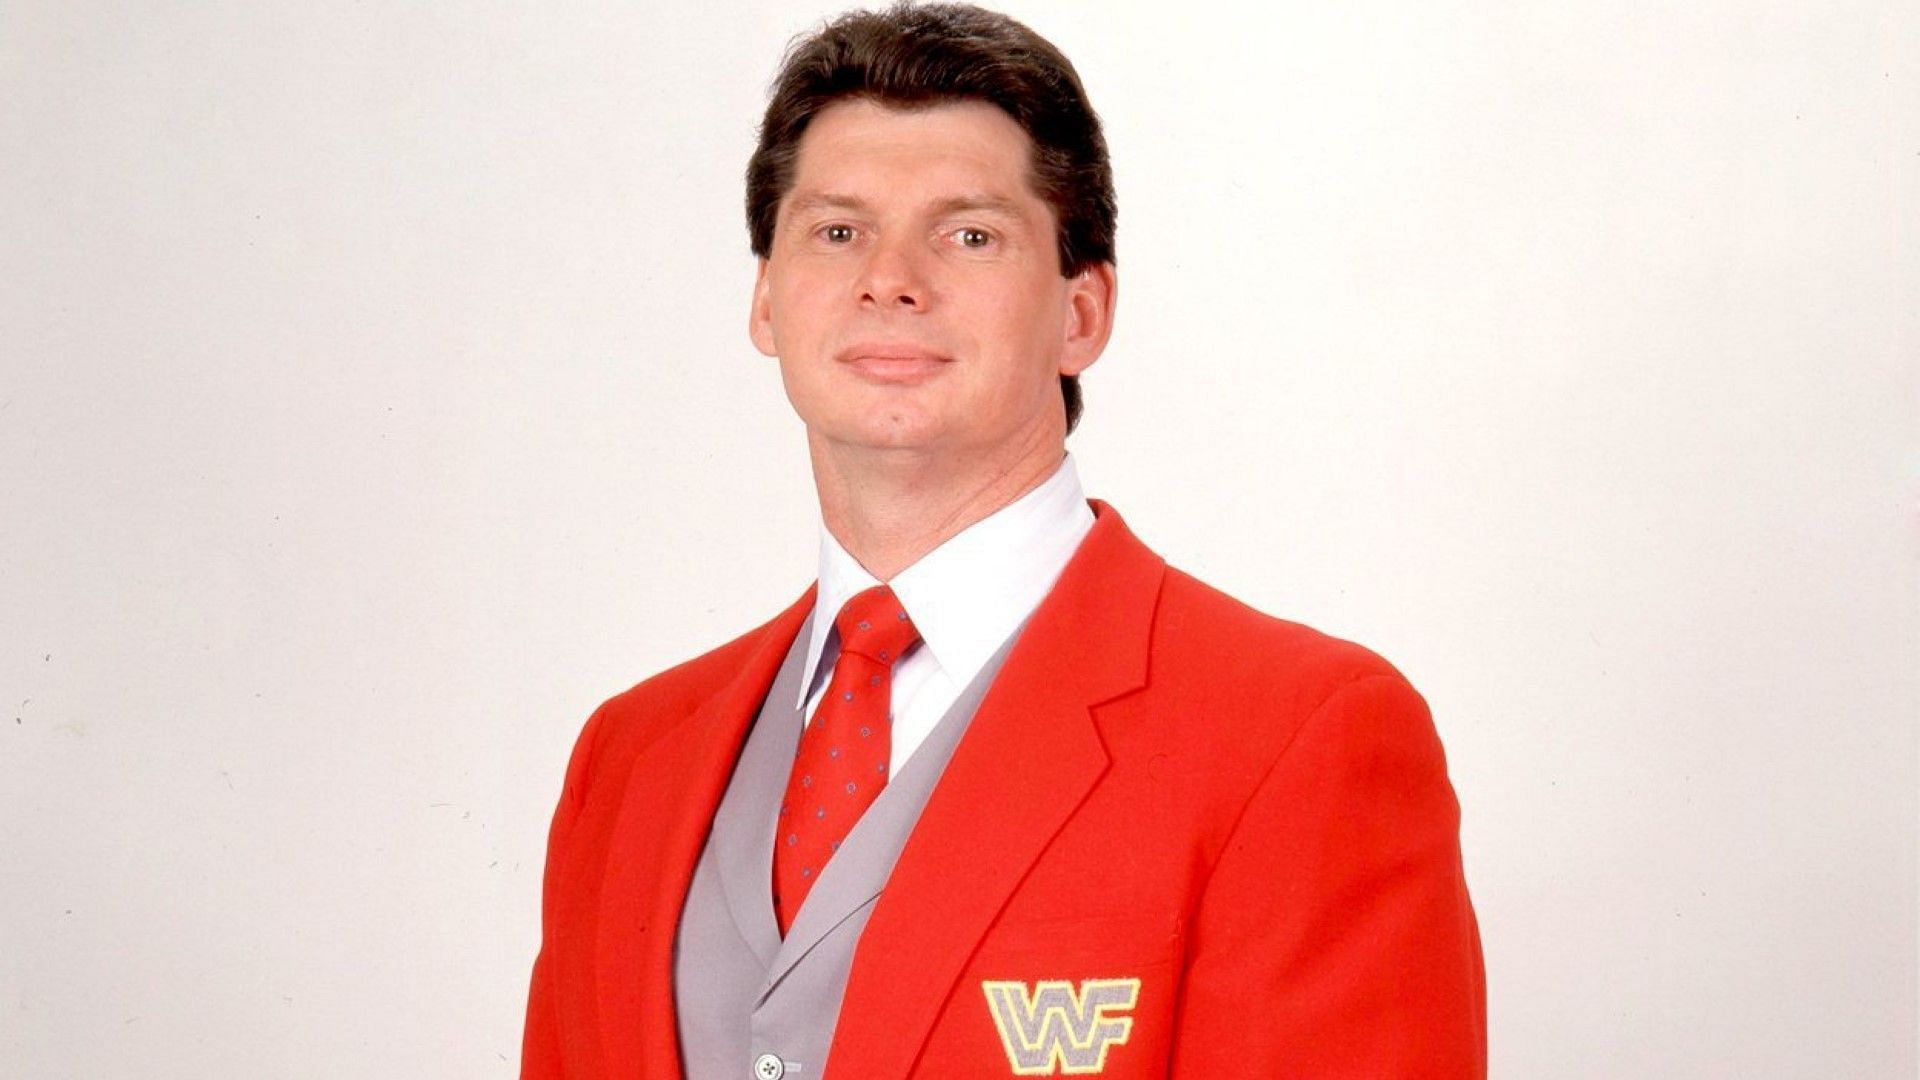 A throwback photo of former WWE owner Vince McMahon